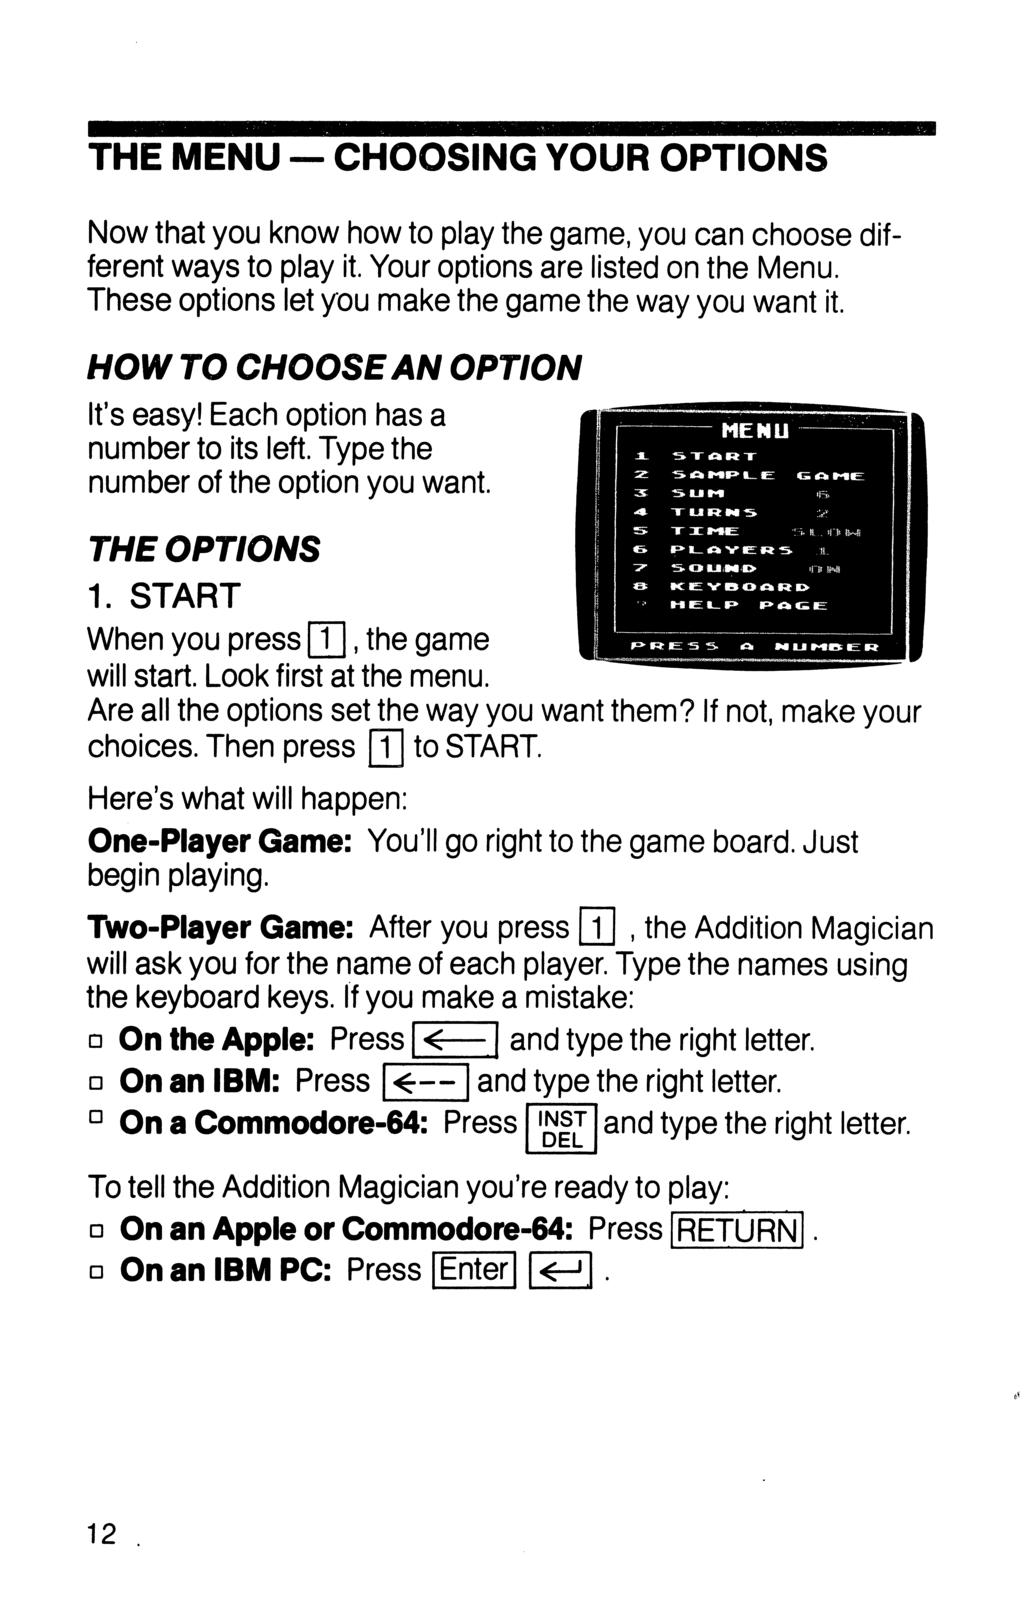 THE MENU CHOOSING YOUR OPTIONS Now that you know how to play the game, you can choose dif ferent ways to play it. Your options are listed on the Menu.